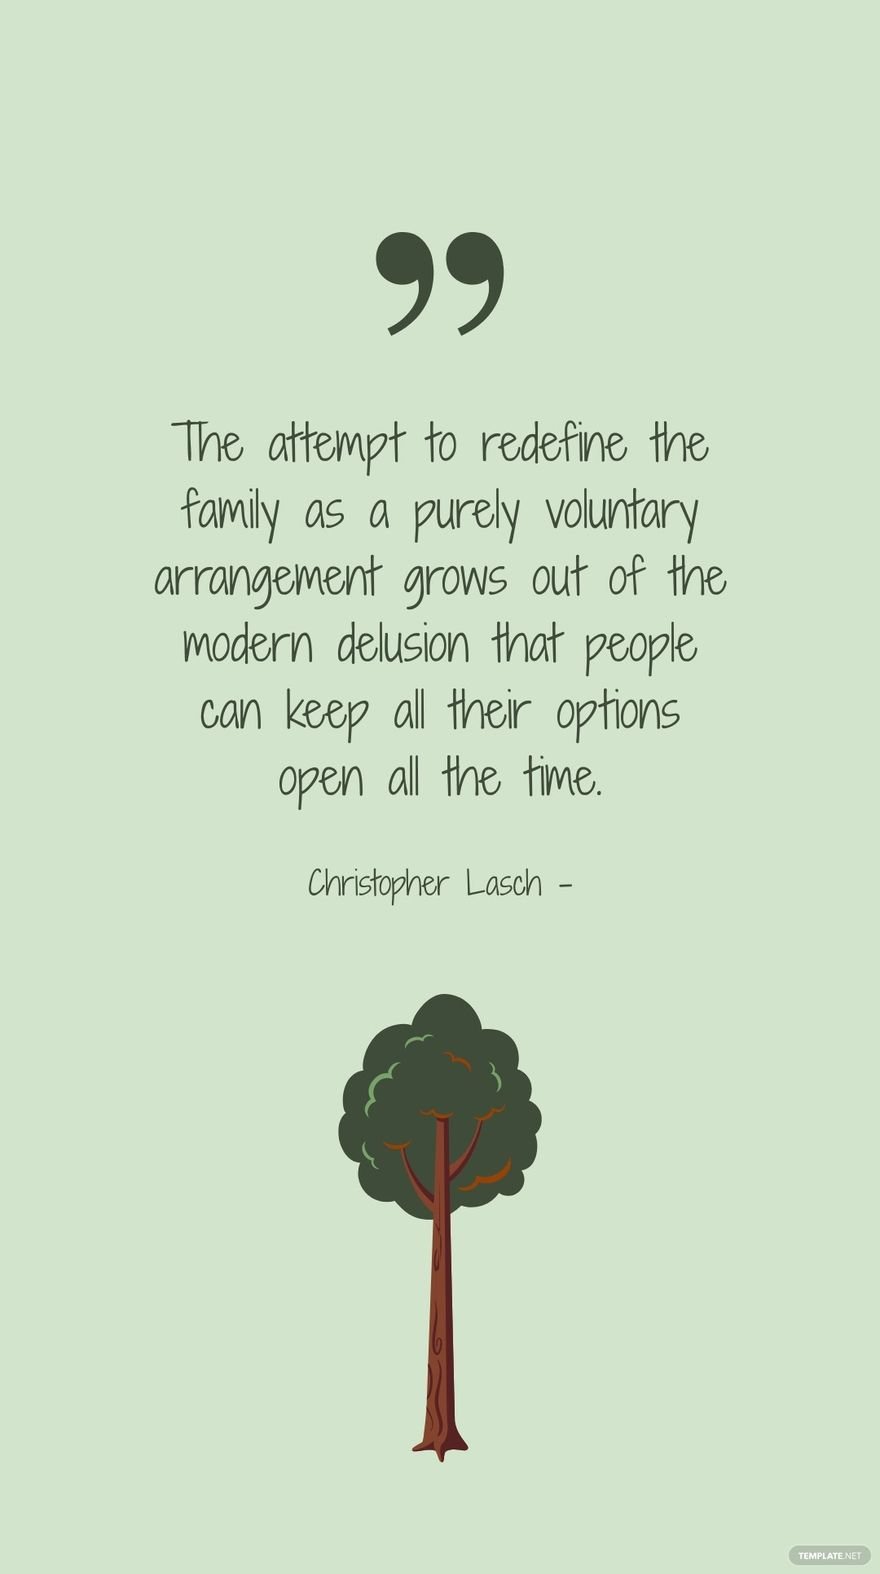 Christopher Lasch - The attempt to redefine the family as a purely voluntary arrangement grows out of the modern delusion that people can keep all their options open all the time.